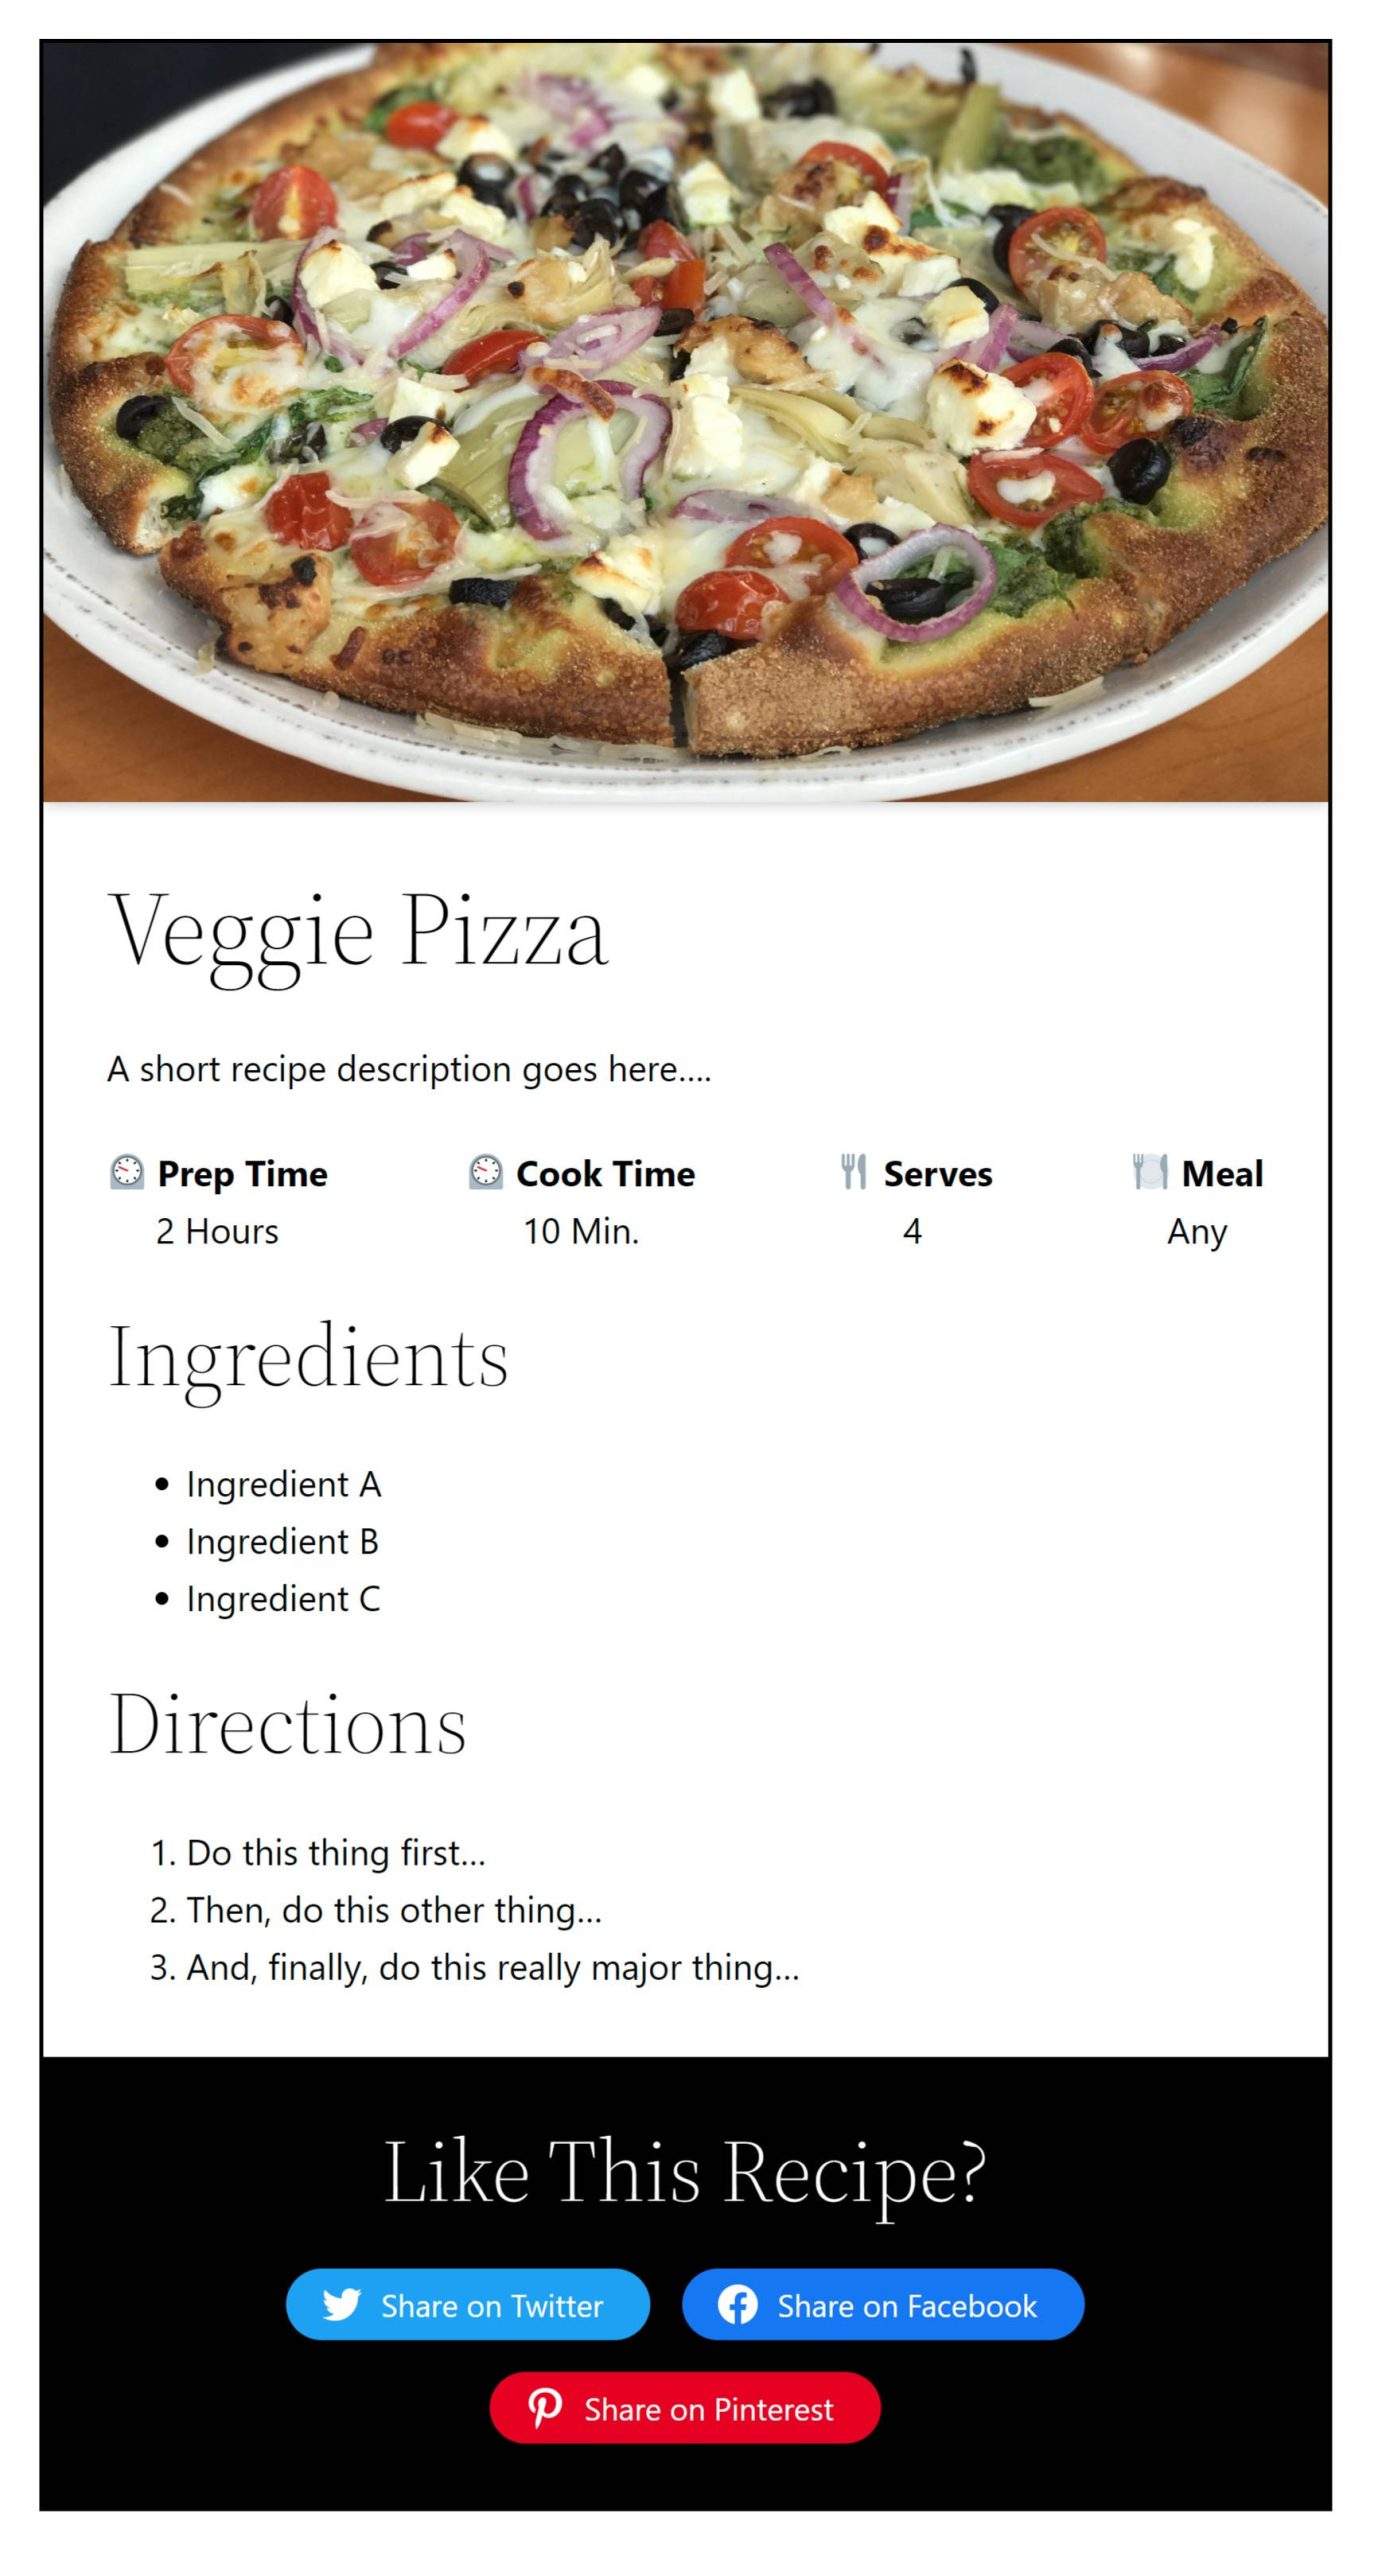 A recipe card with an image of a pizza at the top.  Following that is a title, description, ingredients list, directions list, and social sharing section.